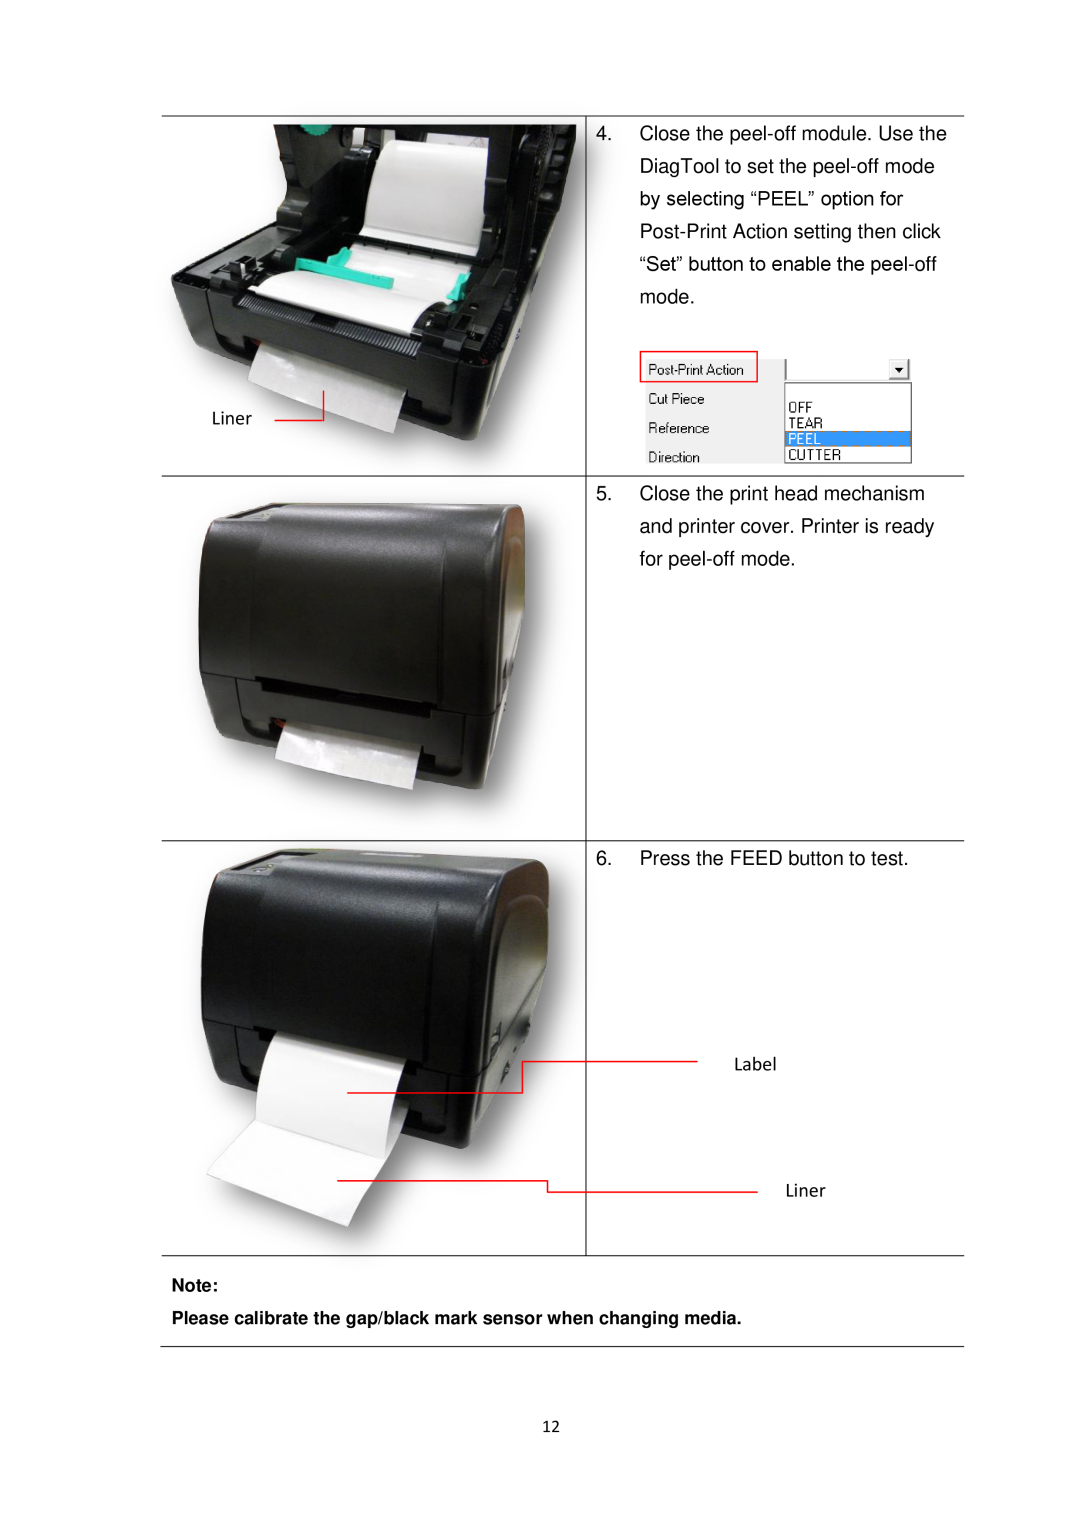 The Speaker Company ta200 Label Liner, Post-Print Action setting then click, “Set” button to enable the peel-off mode 